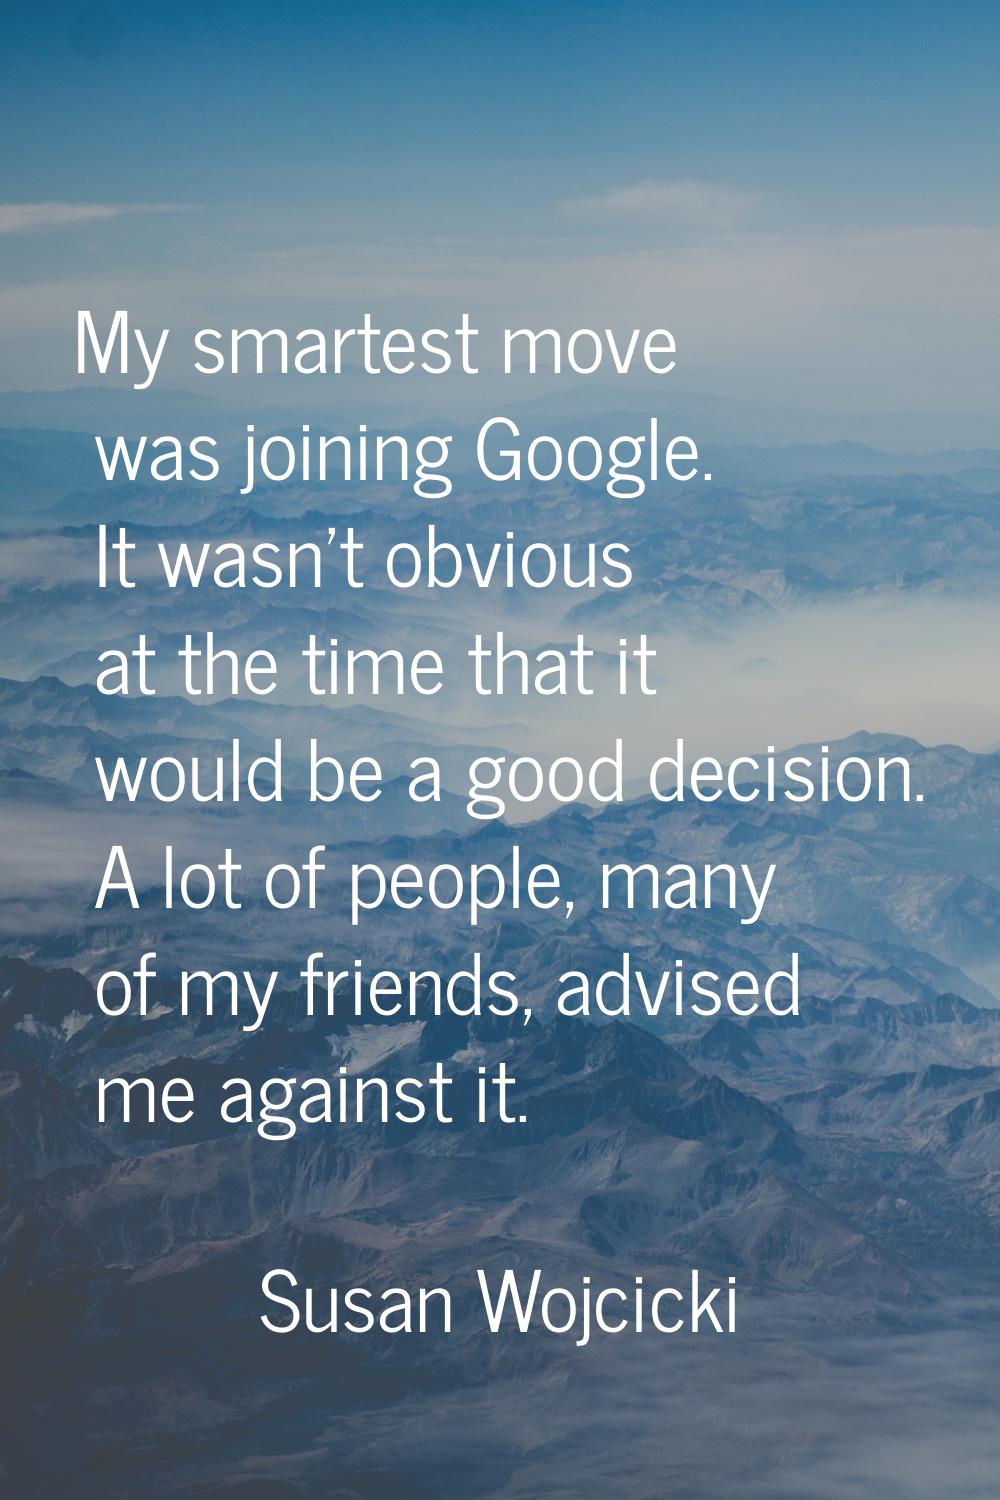 My smartest move was joining Google. It wasn't obvious at the time that it would be a good decision